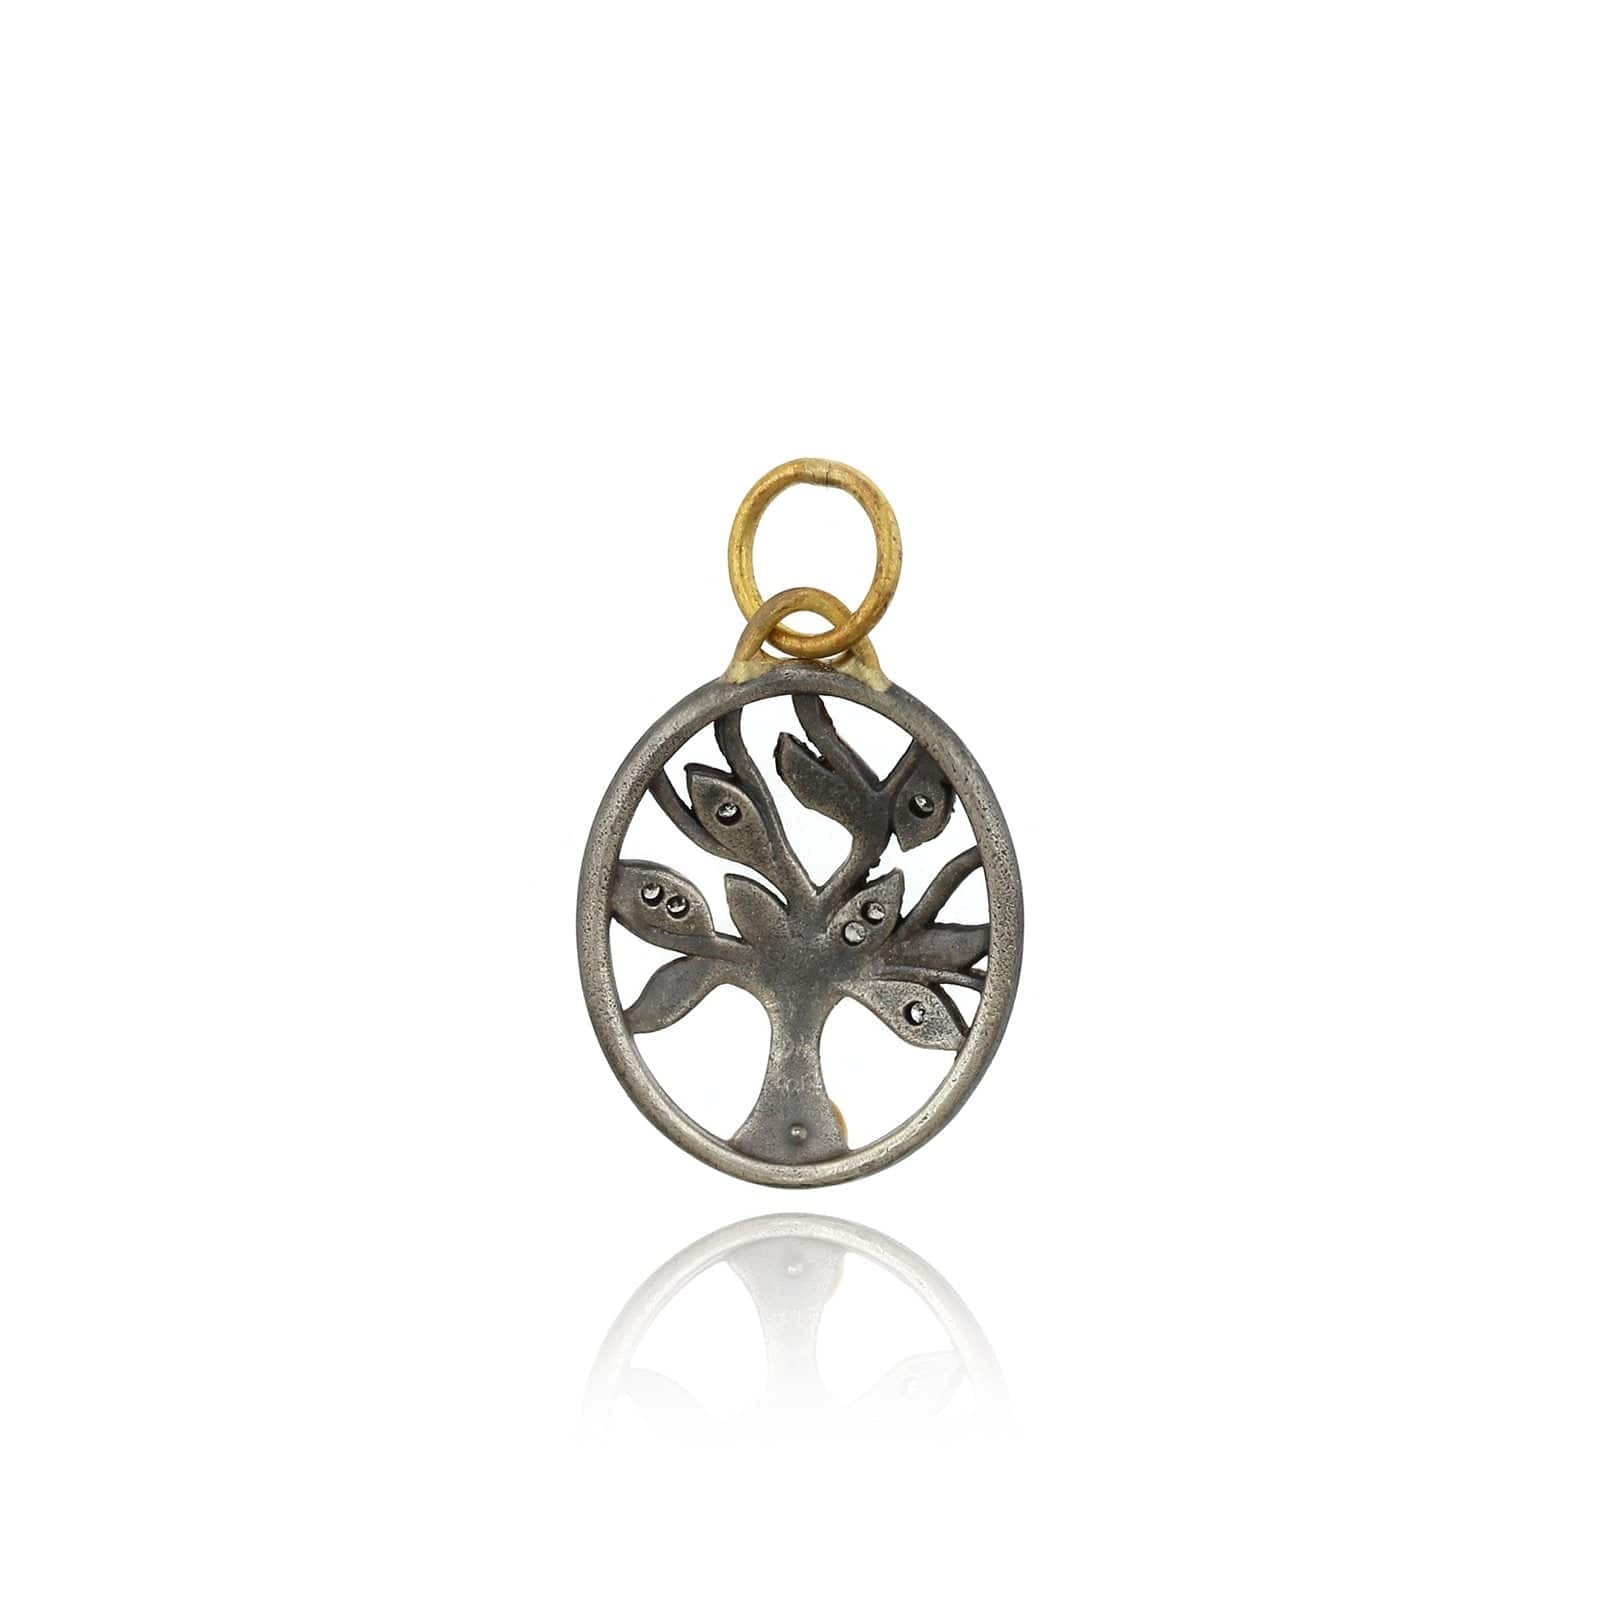 Sterling Silver and 24K Yellow Gold Tree of Life Charm